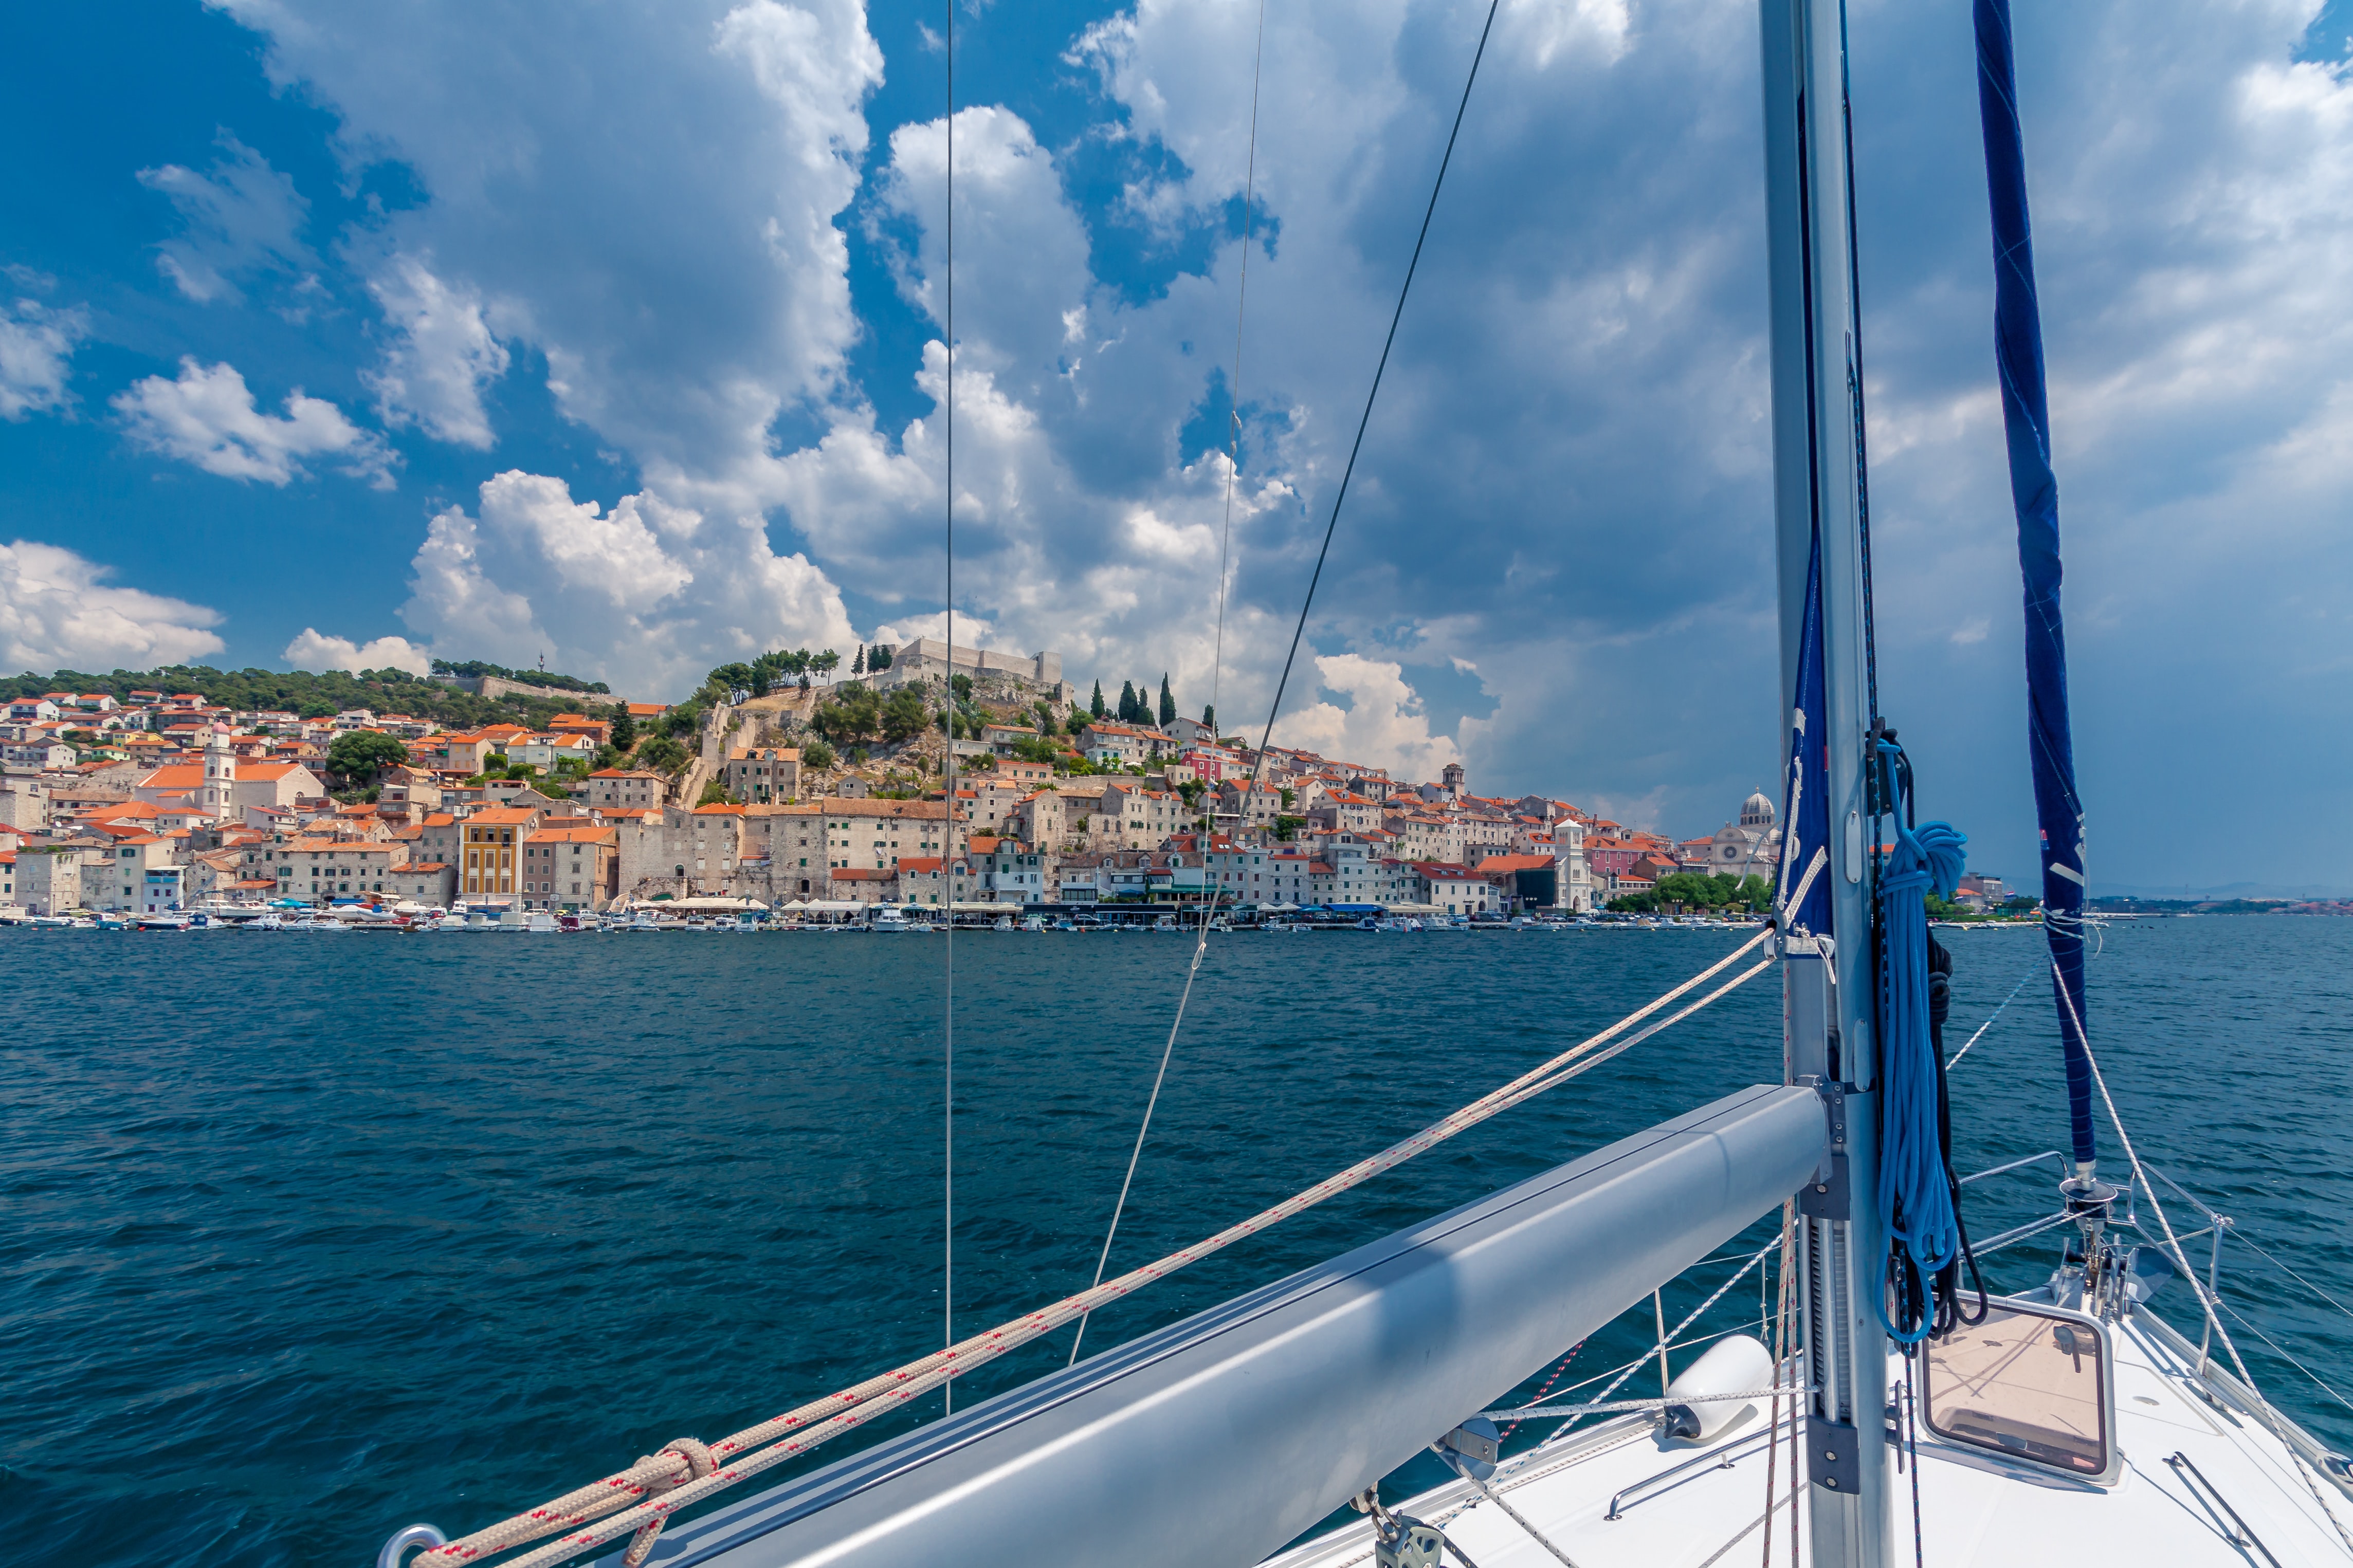 Sailing boat on the coast of Croatia with a view of a old town